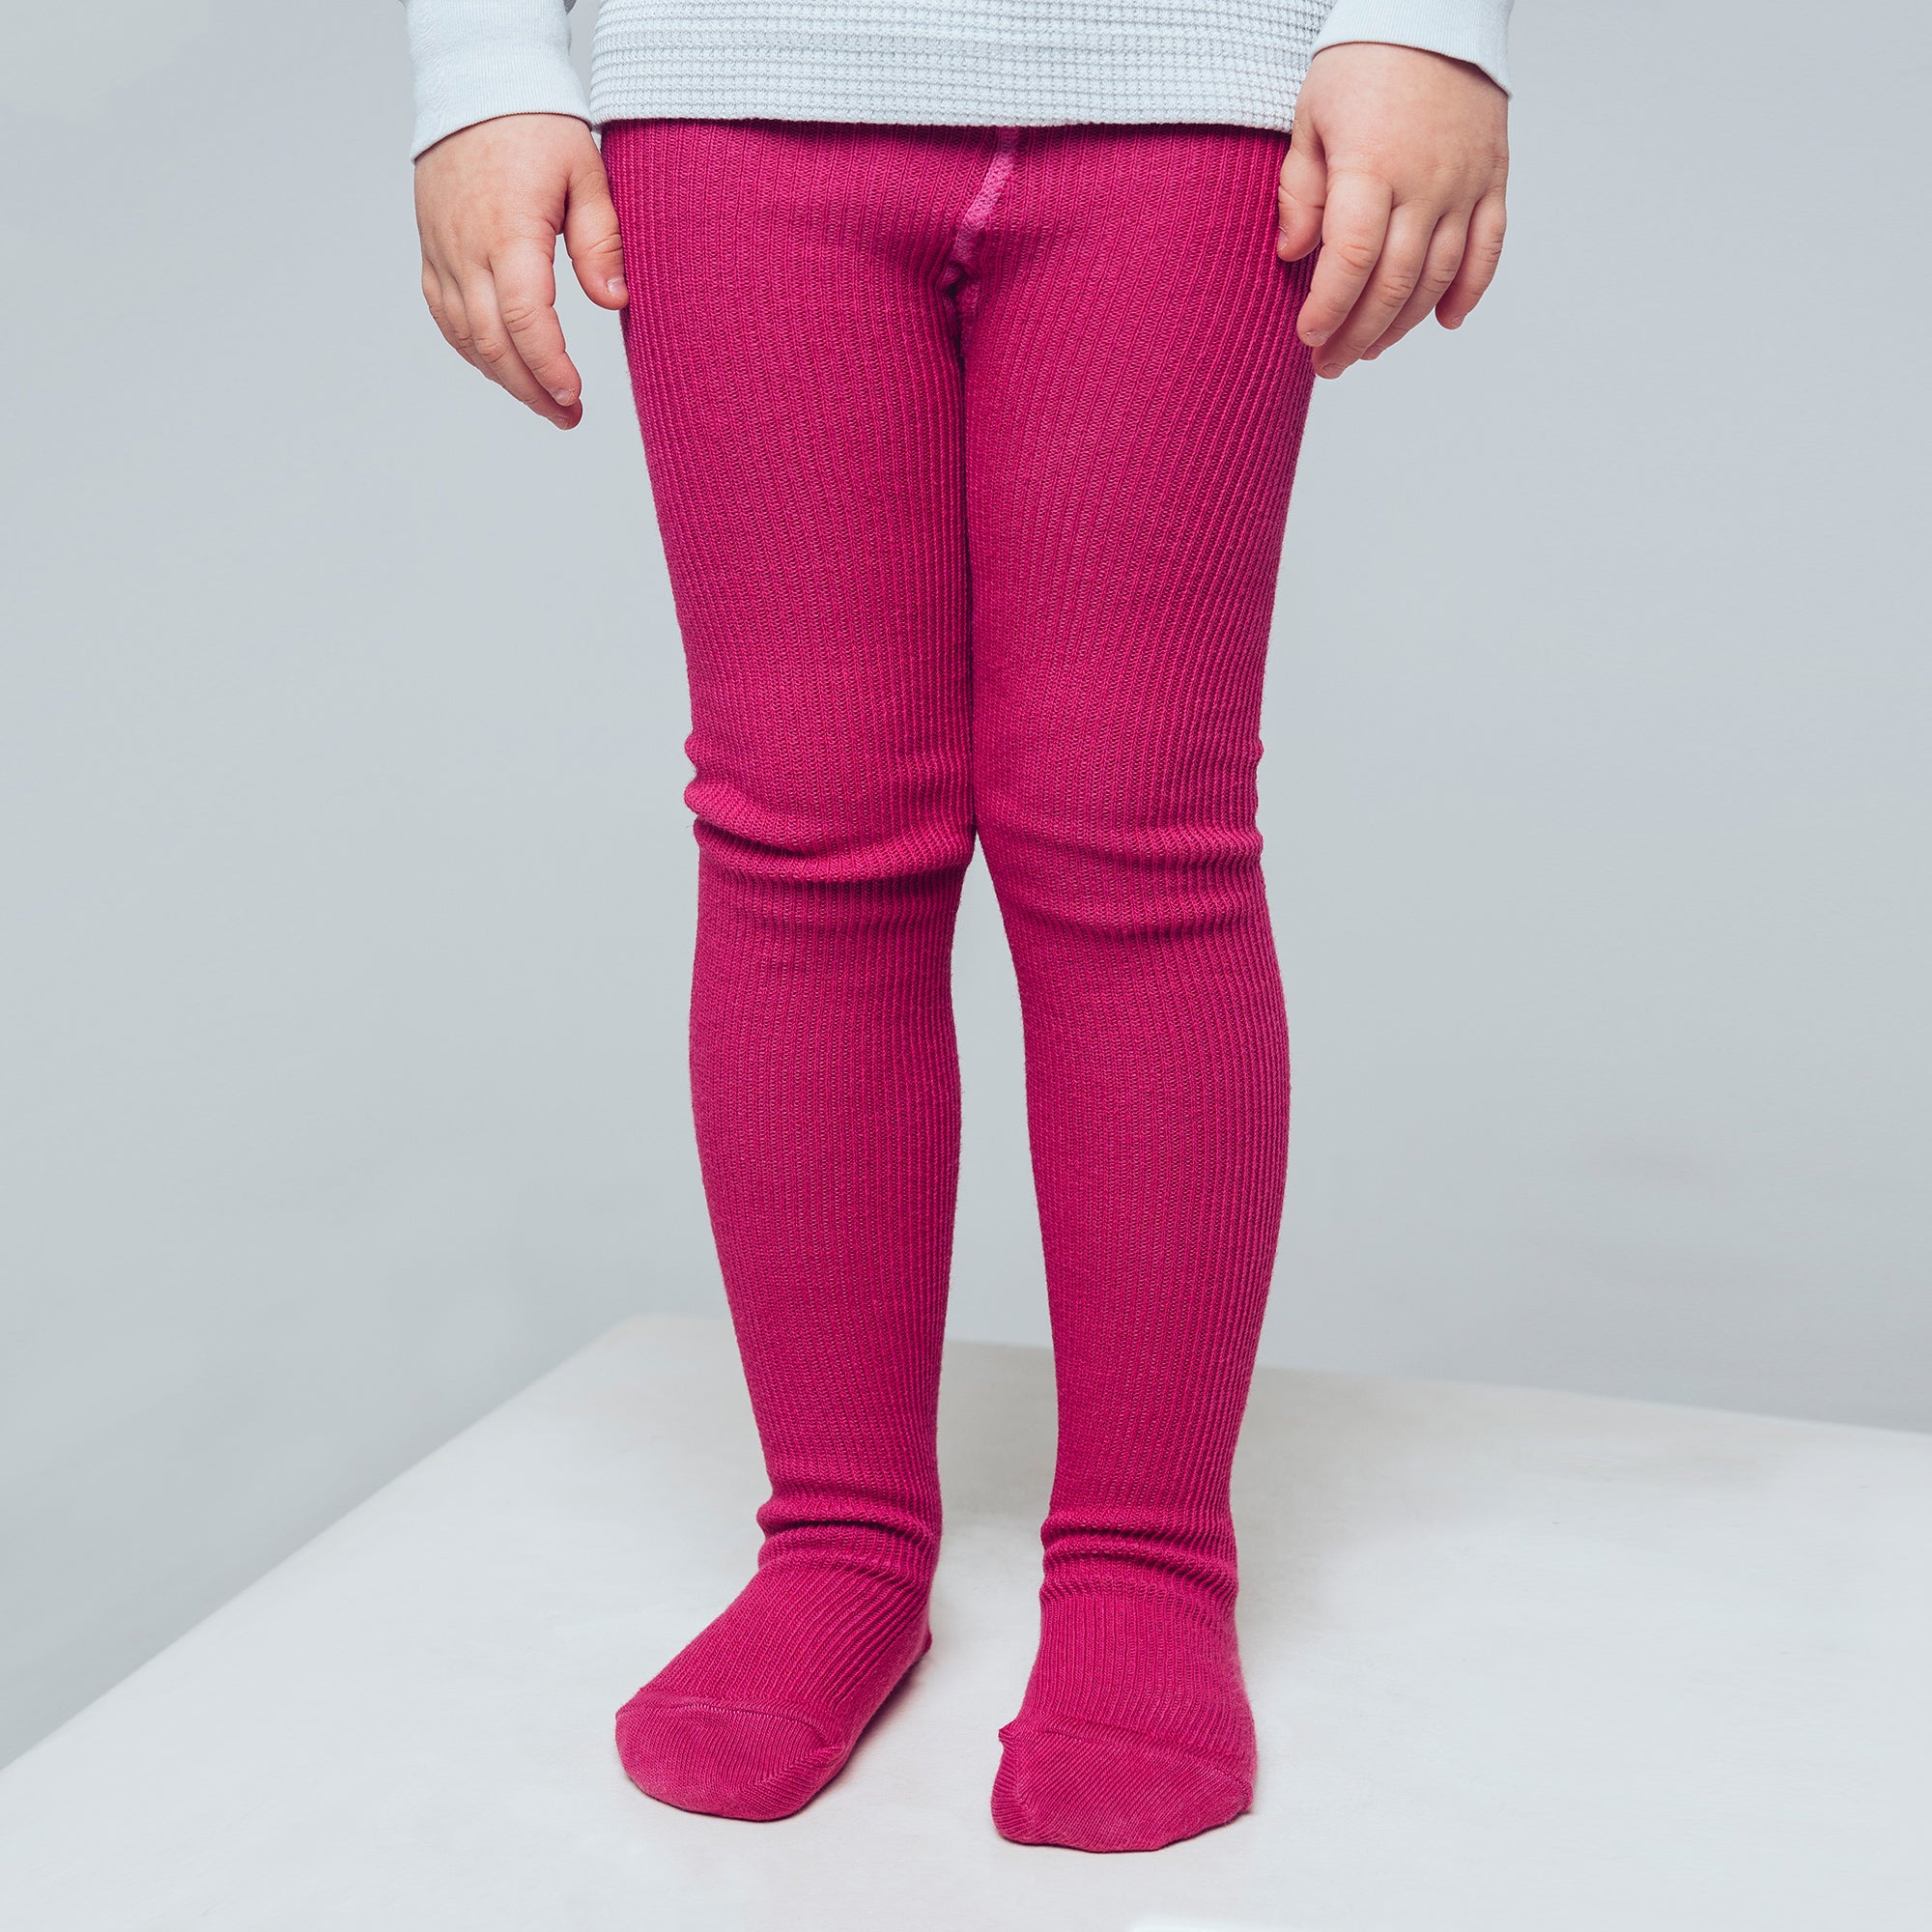 Leggings for PRE TEENS - Tahnee and the Treehouse